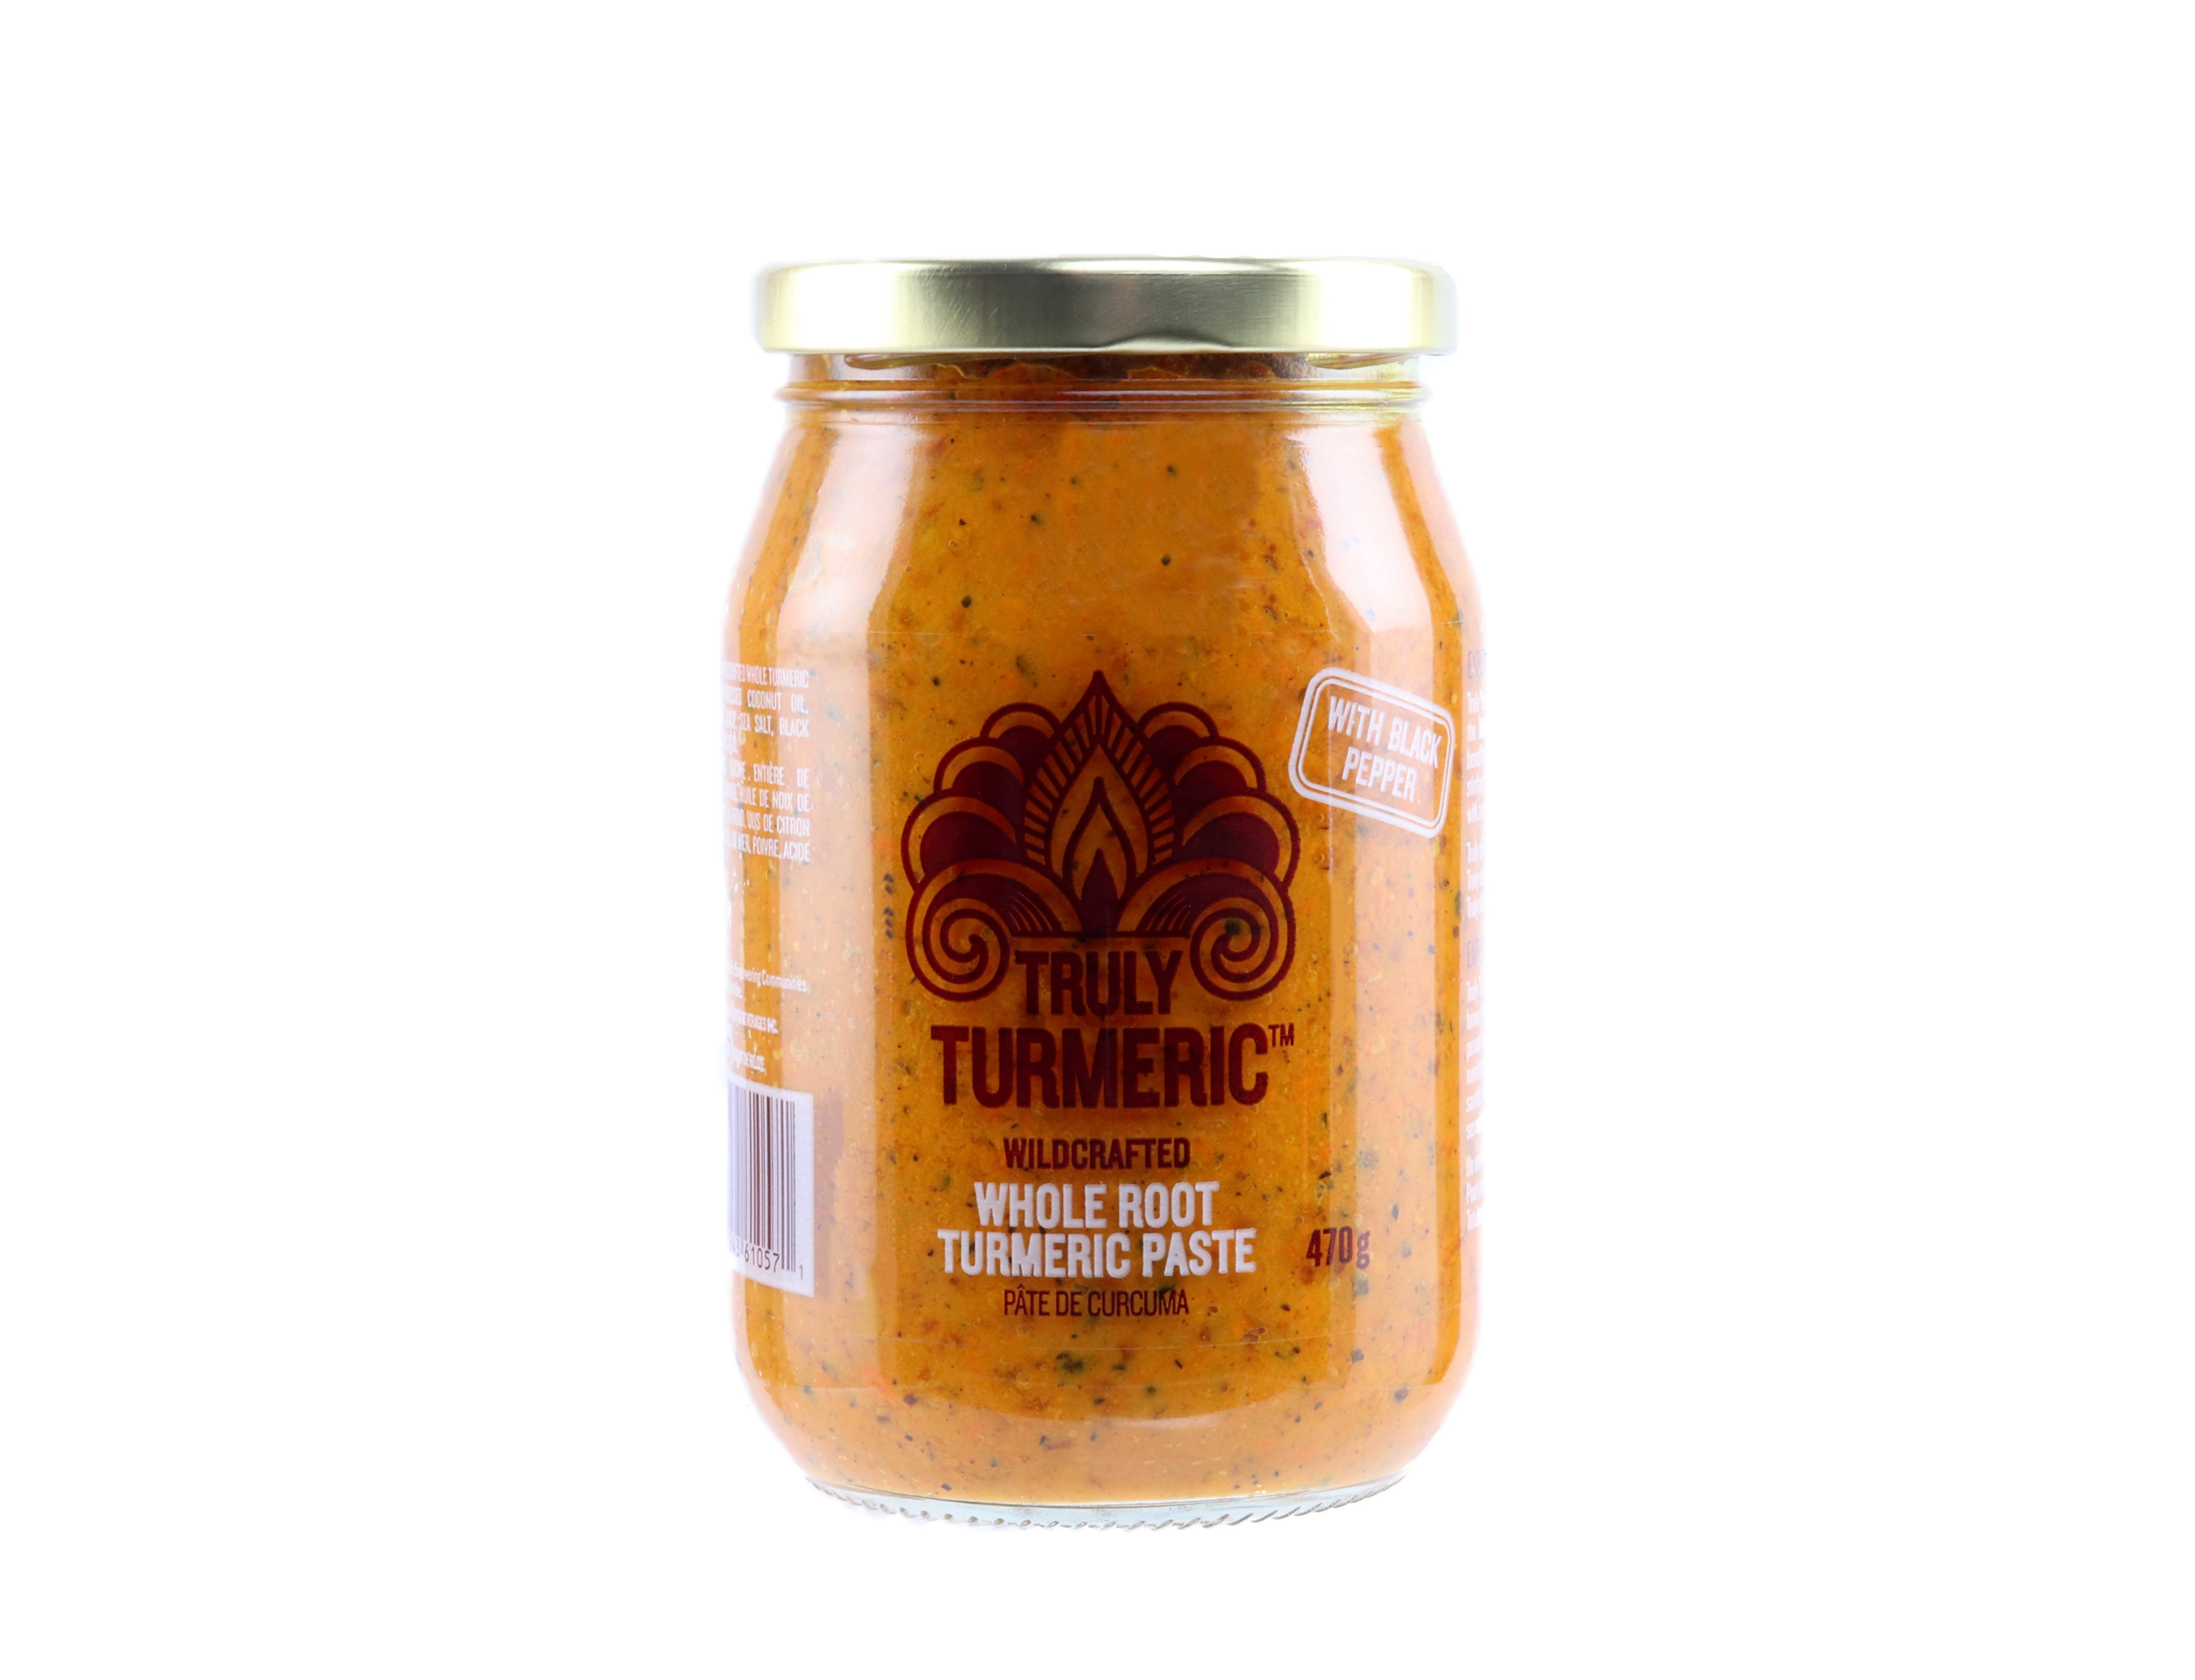 Truly Turmeric Whole-root Turmeric Paste with Black Pepper 470g